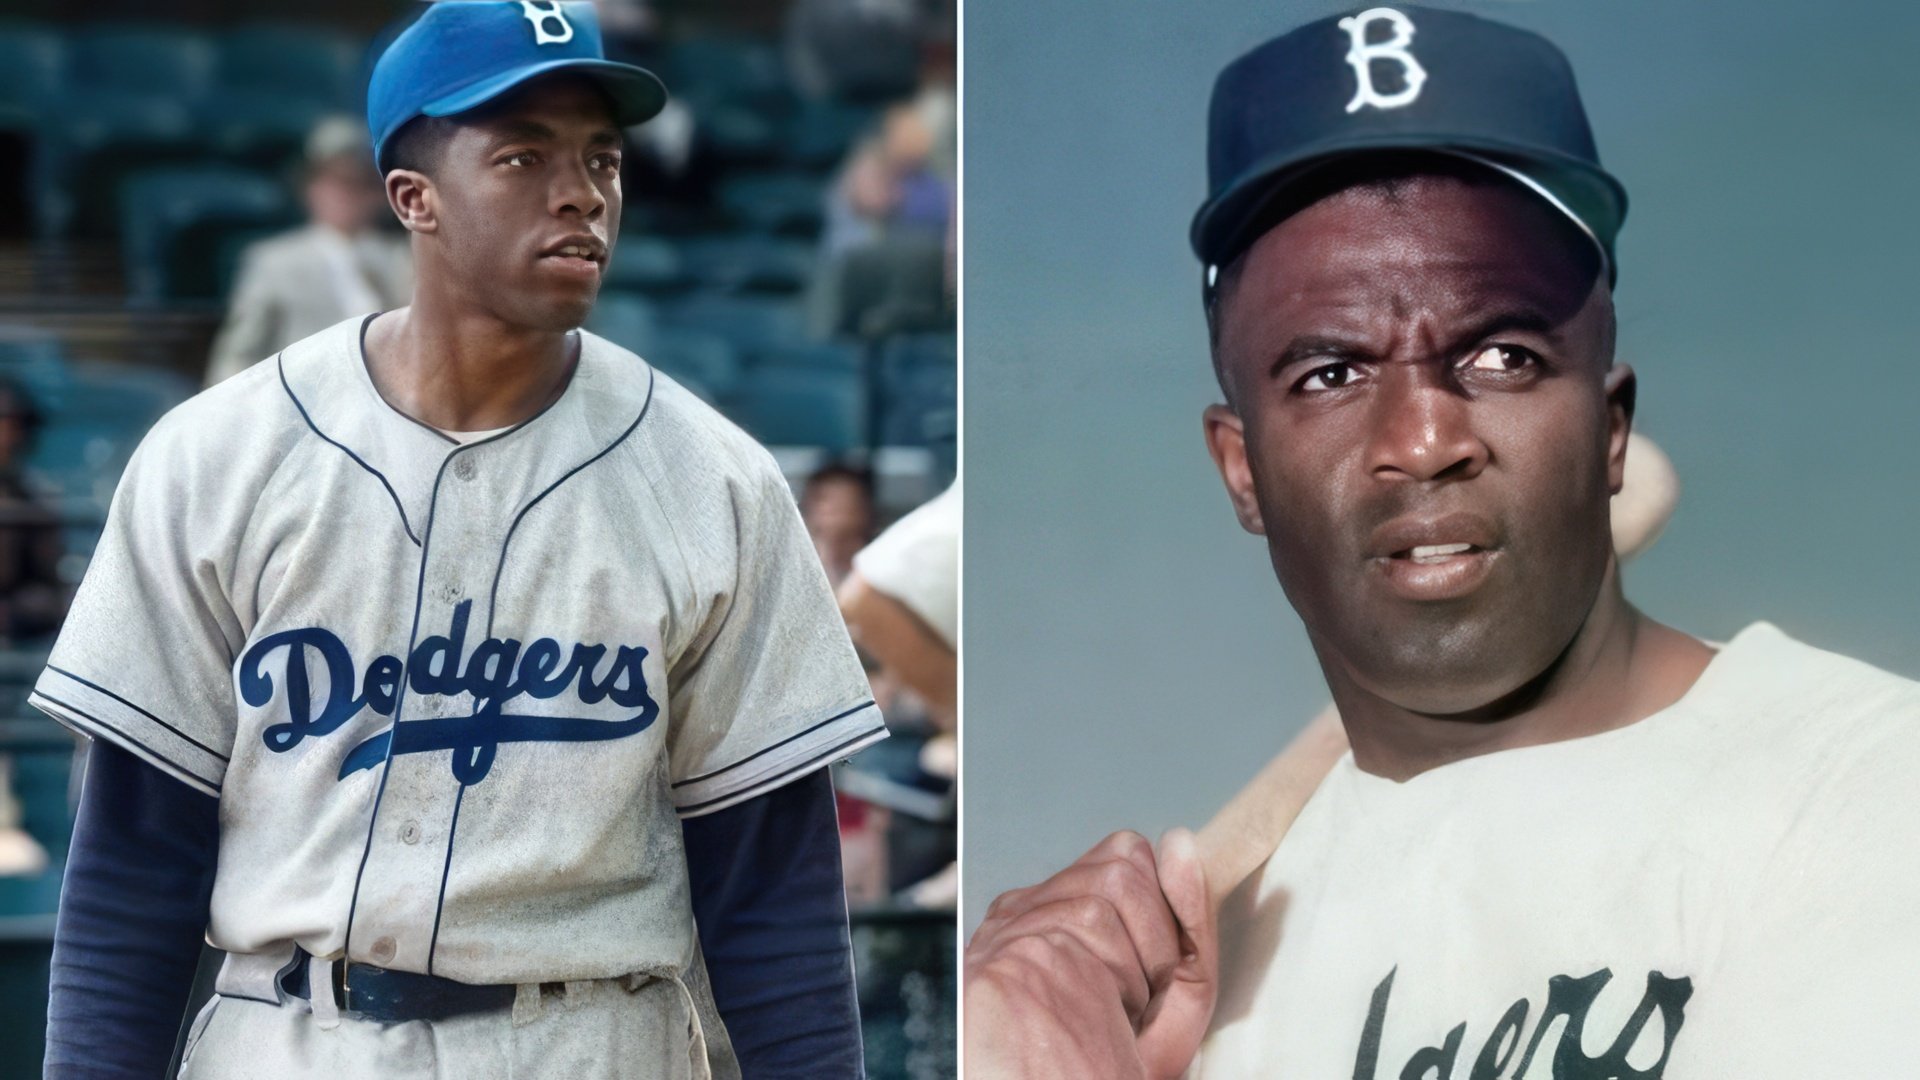 Chadwick Boseman in the movie '42' and his real-life counterpart